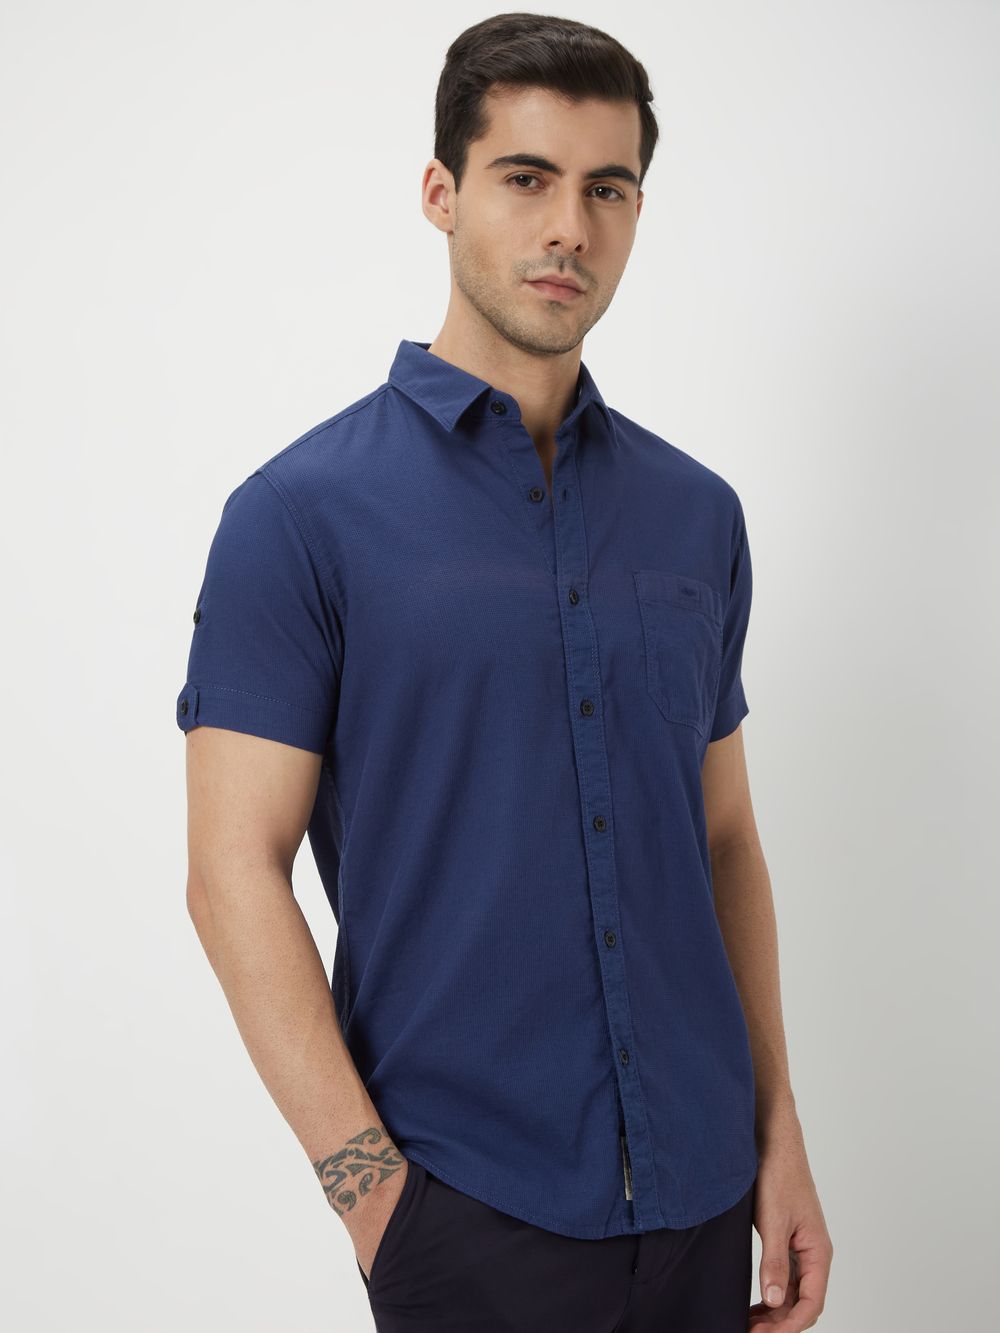 Navy Textured Slim Fit Casual Shirt